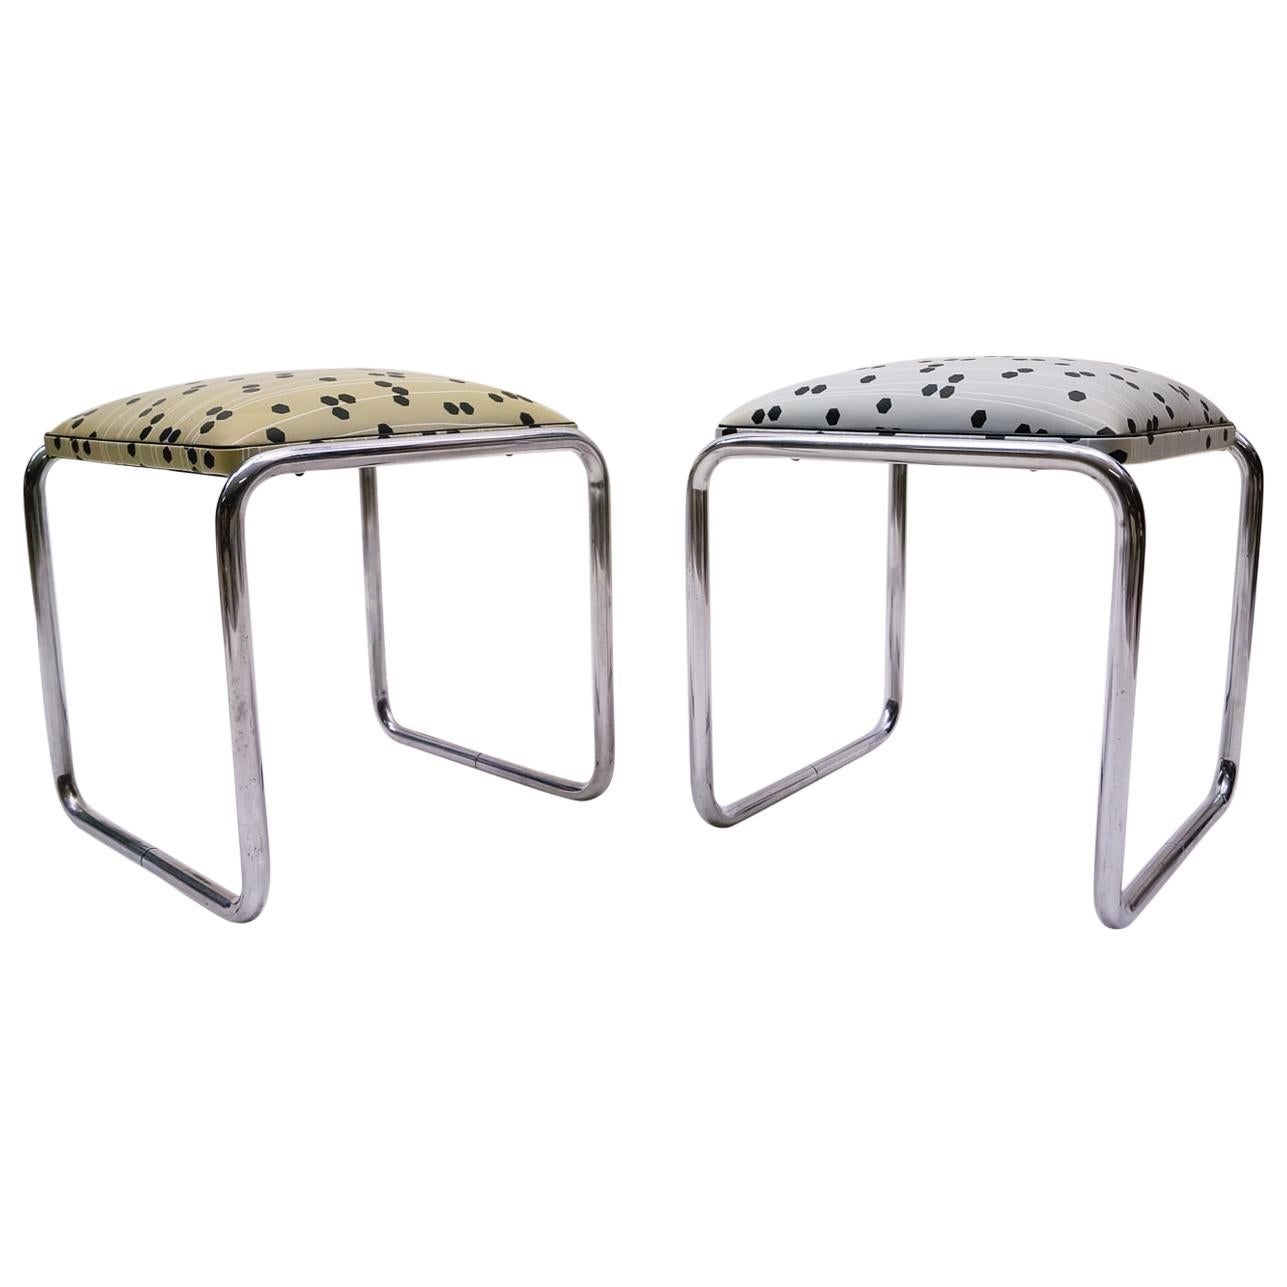 Pair of Tubular Steel Bauhaus Stools with Graphic Patterns, 1940s, Germany